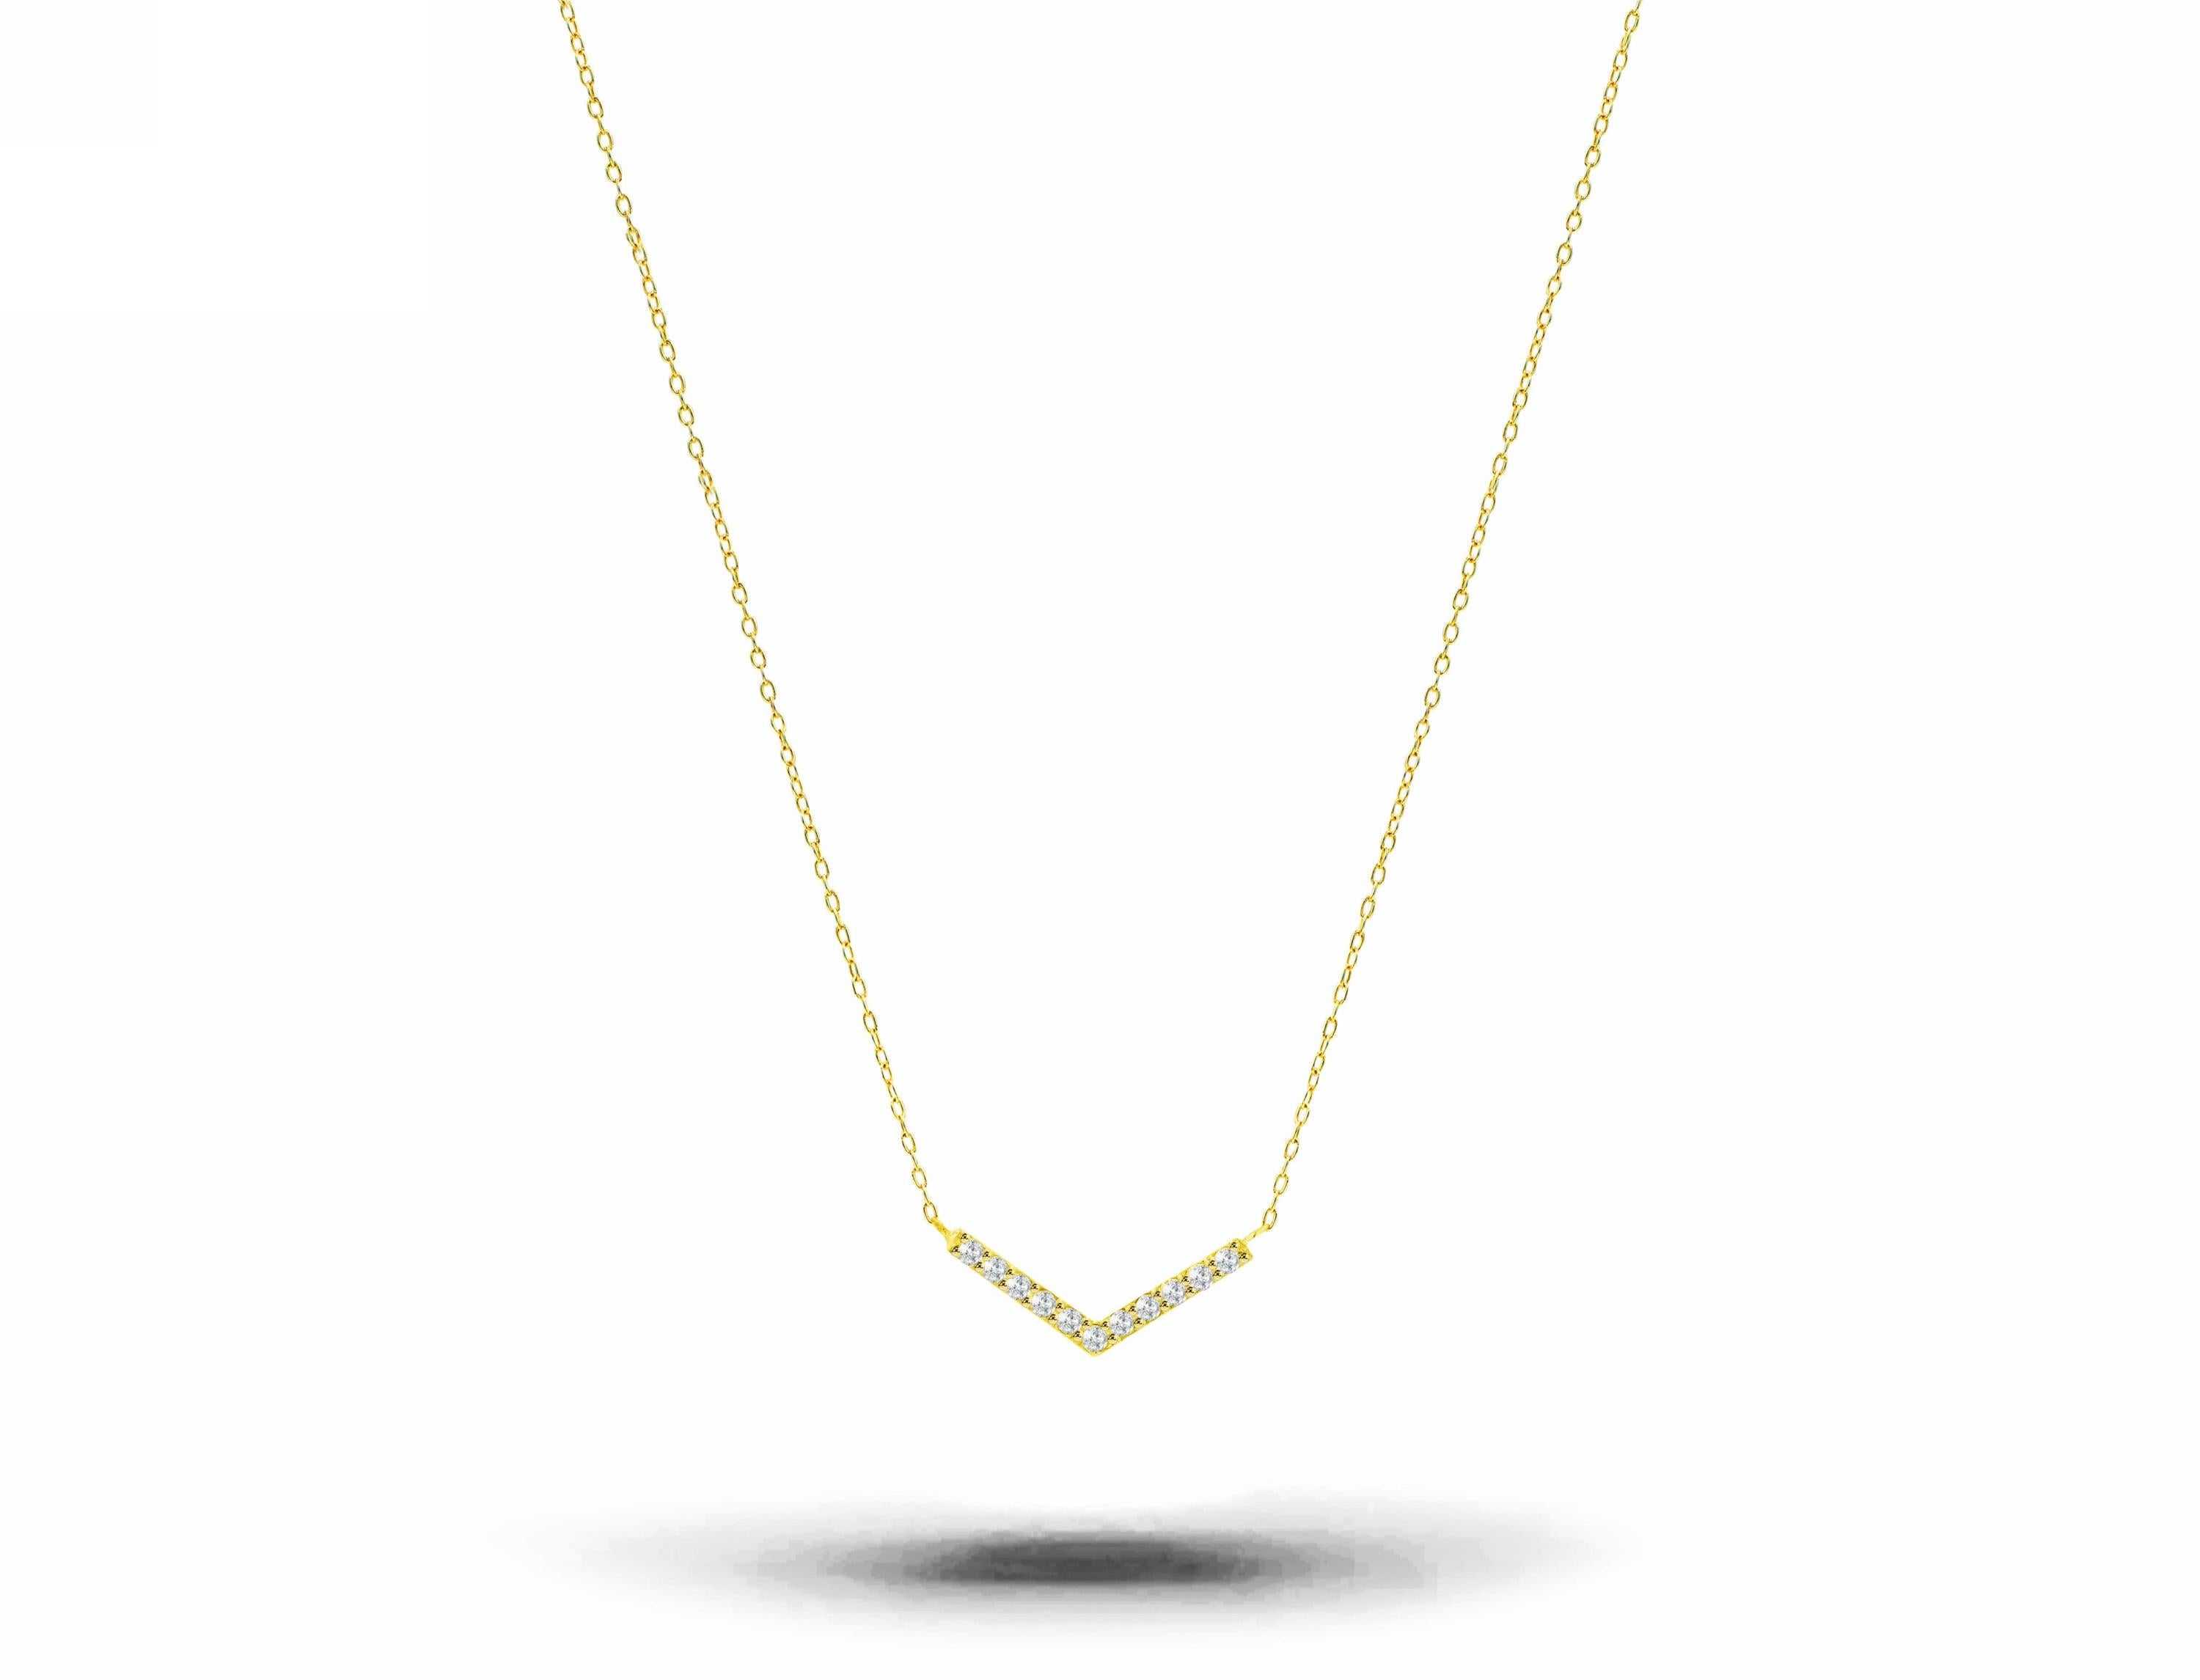 Delicate Dainty Chevron Necklace with Natural Diamond made of 18k solid gold available in three colors, Rose Gold / White Gold / Yellow Gold.

This modern minimalist necklace is a perfect gift for loved once and perfect to wear any occasion or day